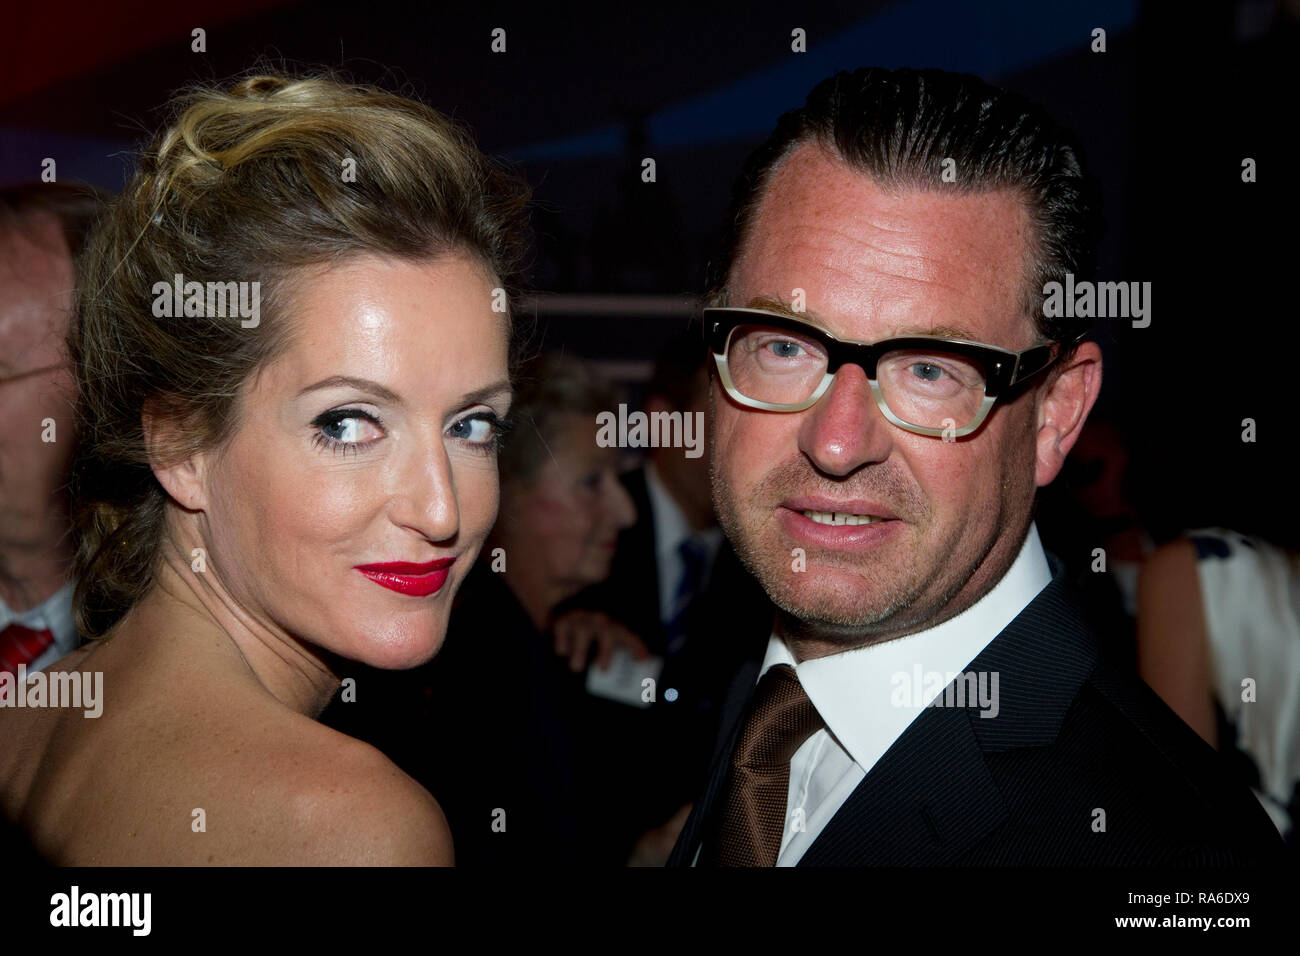 Katja KESSLER celebrates her 50th birthday on January 5, 2019, chief editor in chief Kai DIEKMANN with her life companion Katja KESSLER, festive event on the occasion of the 100th birthday of publisher Axel Caesar Springer in Berlin, 02.05.2012 vÇ¬ | usage worldwide Stock Photo